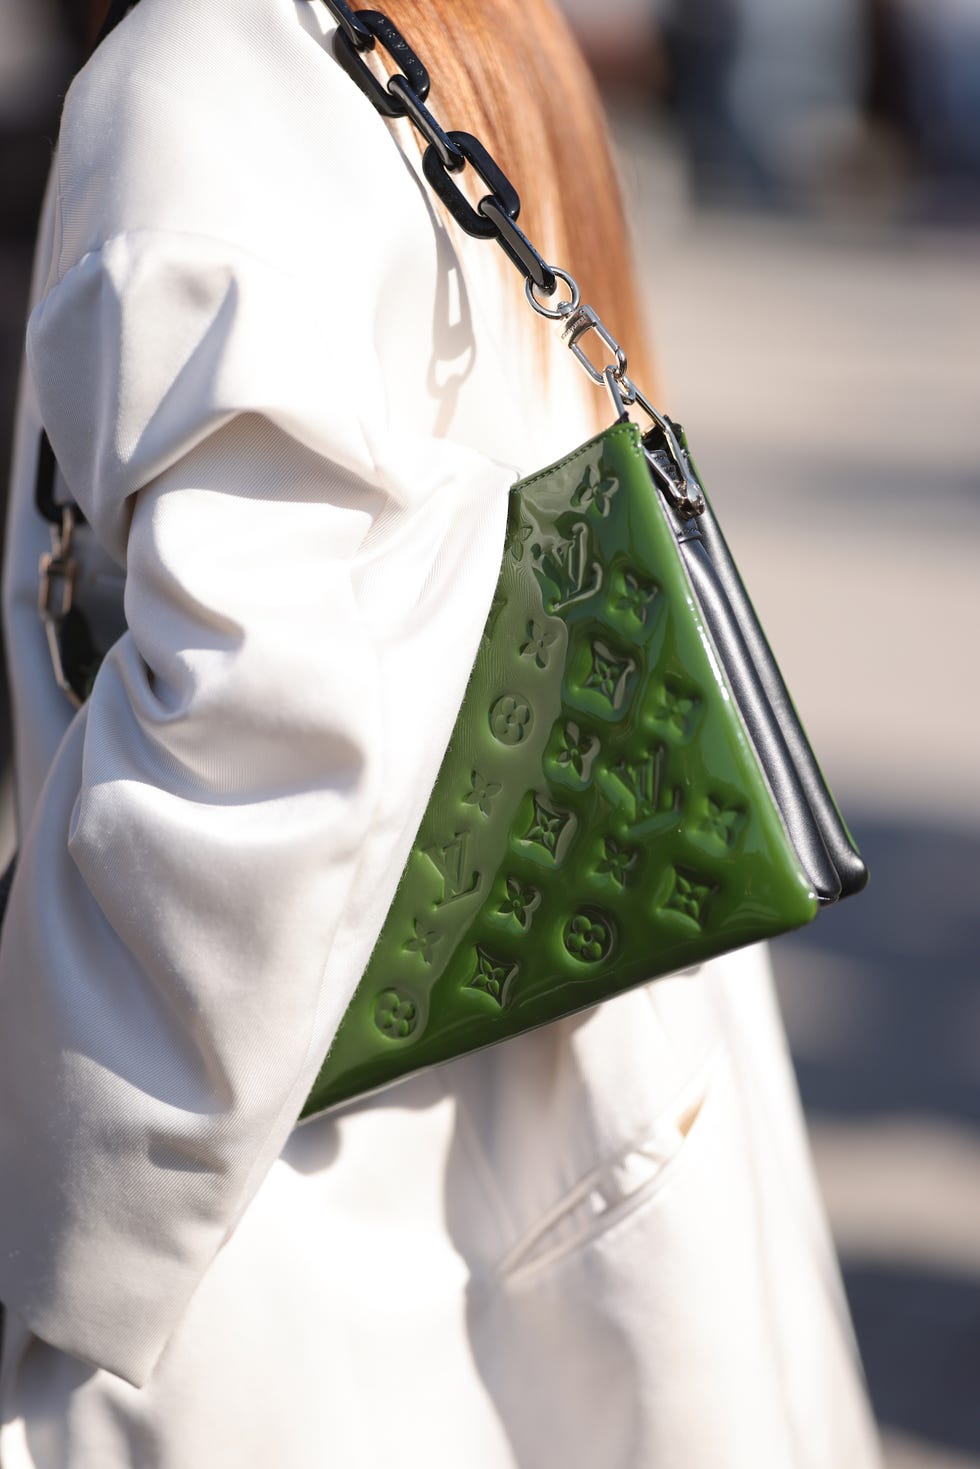 London is Now the Cheapest Place to Buy a Louis Vuitton Handbag